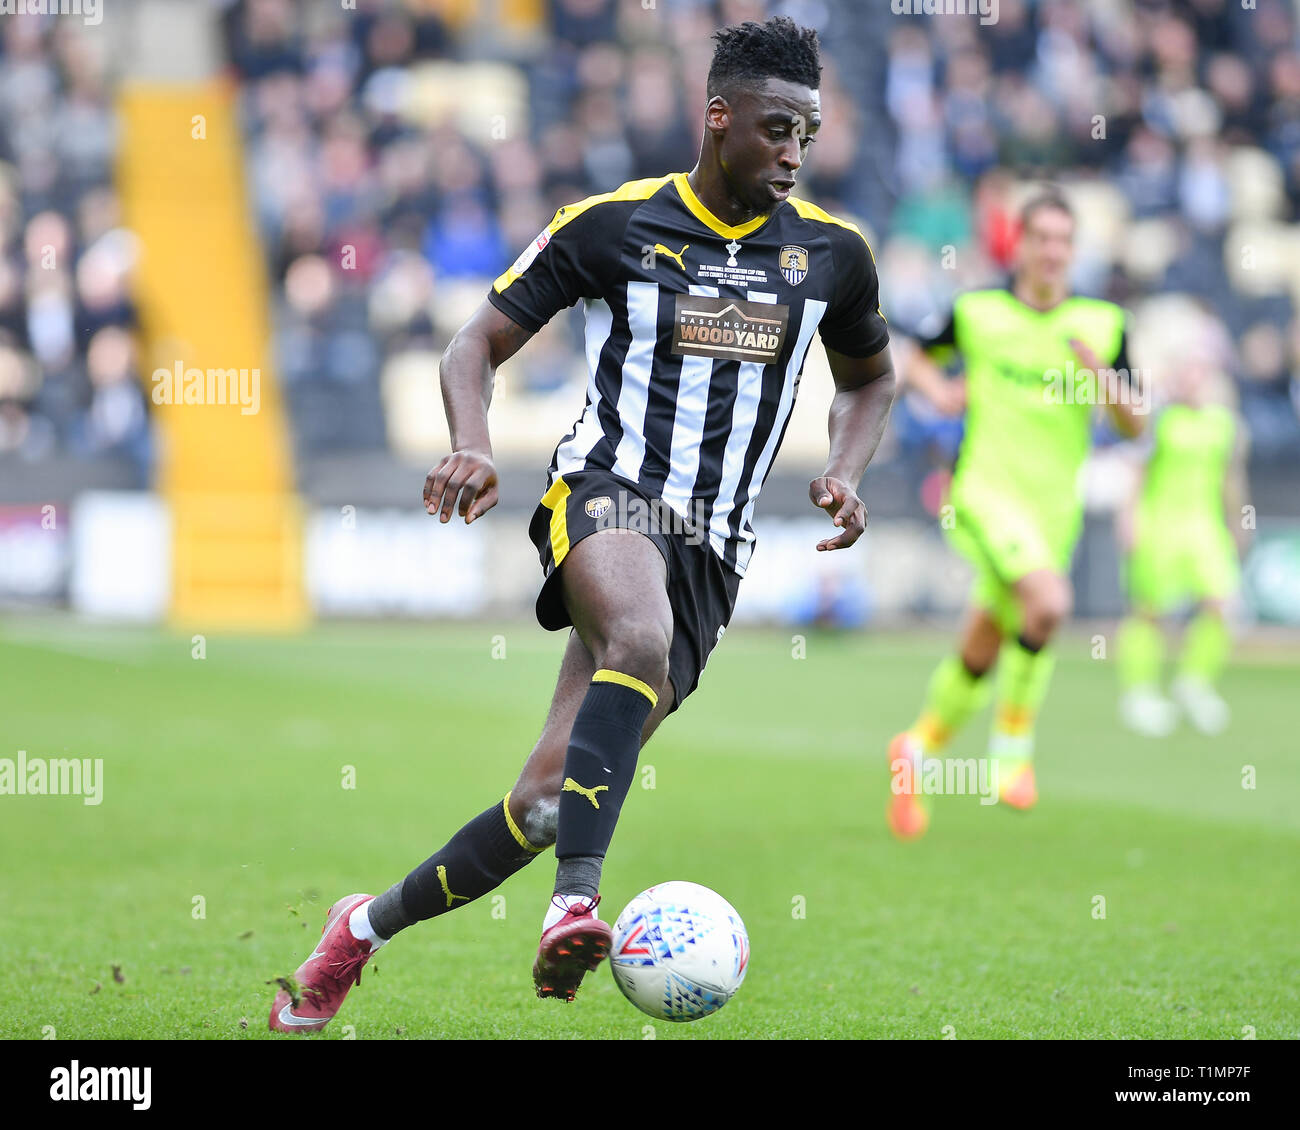 23rd March 2019 , Meadow Lane, Nottingham, England; Sky Bet League Two, Notts County vs Exeter City ; Enzio Boldewijn (11) of Notts County   Credit Jon Hobley/News Images Stock Photo